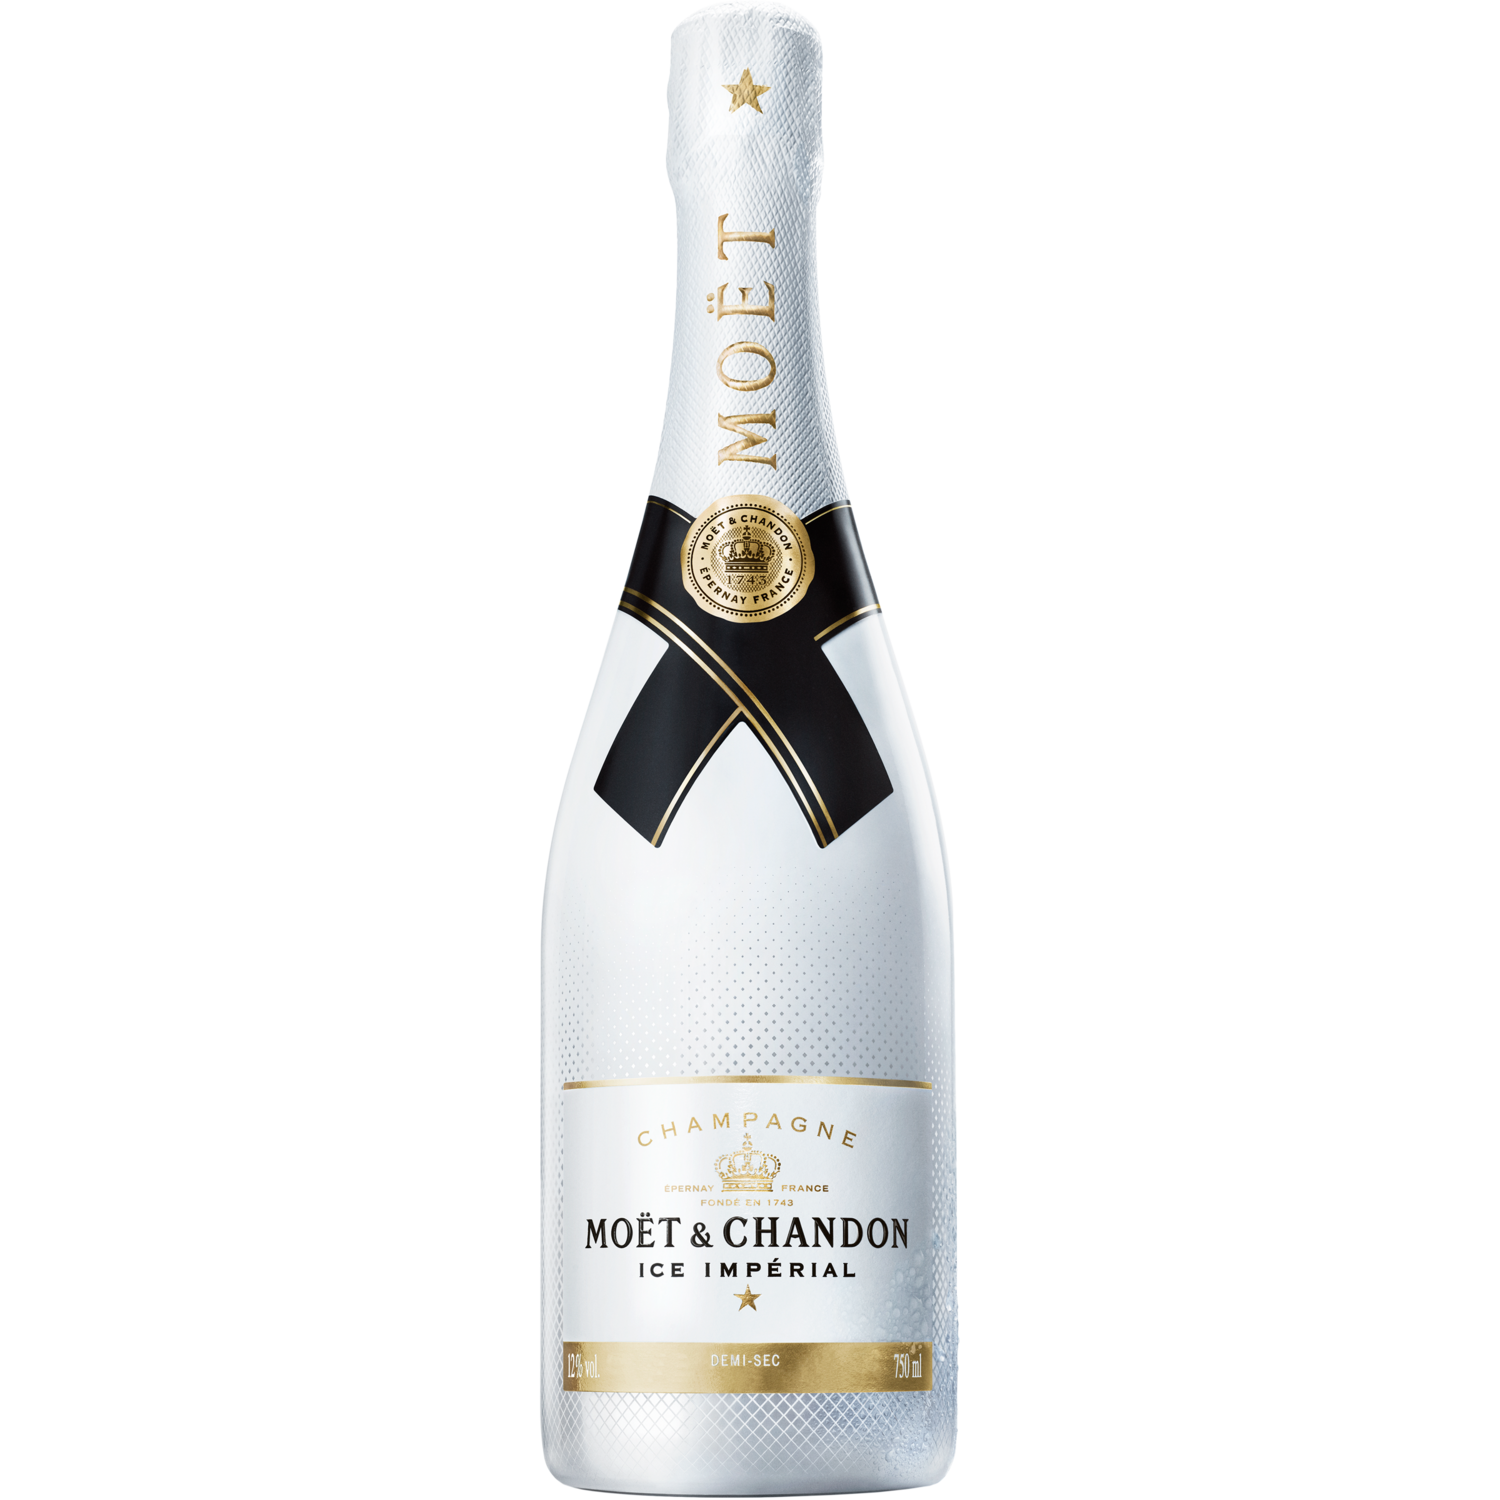 Champagne Moet & Chandon Ice Imperial x750cc